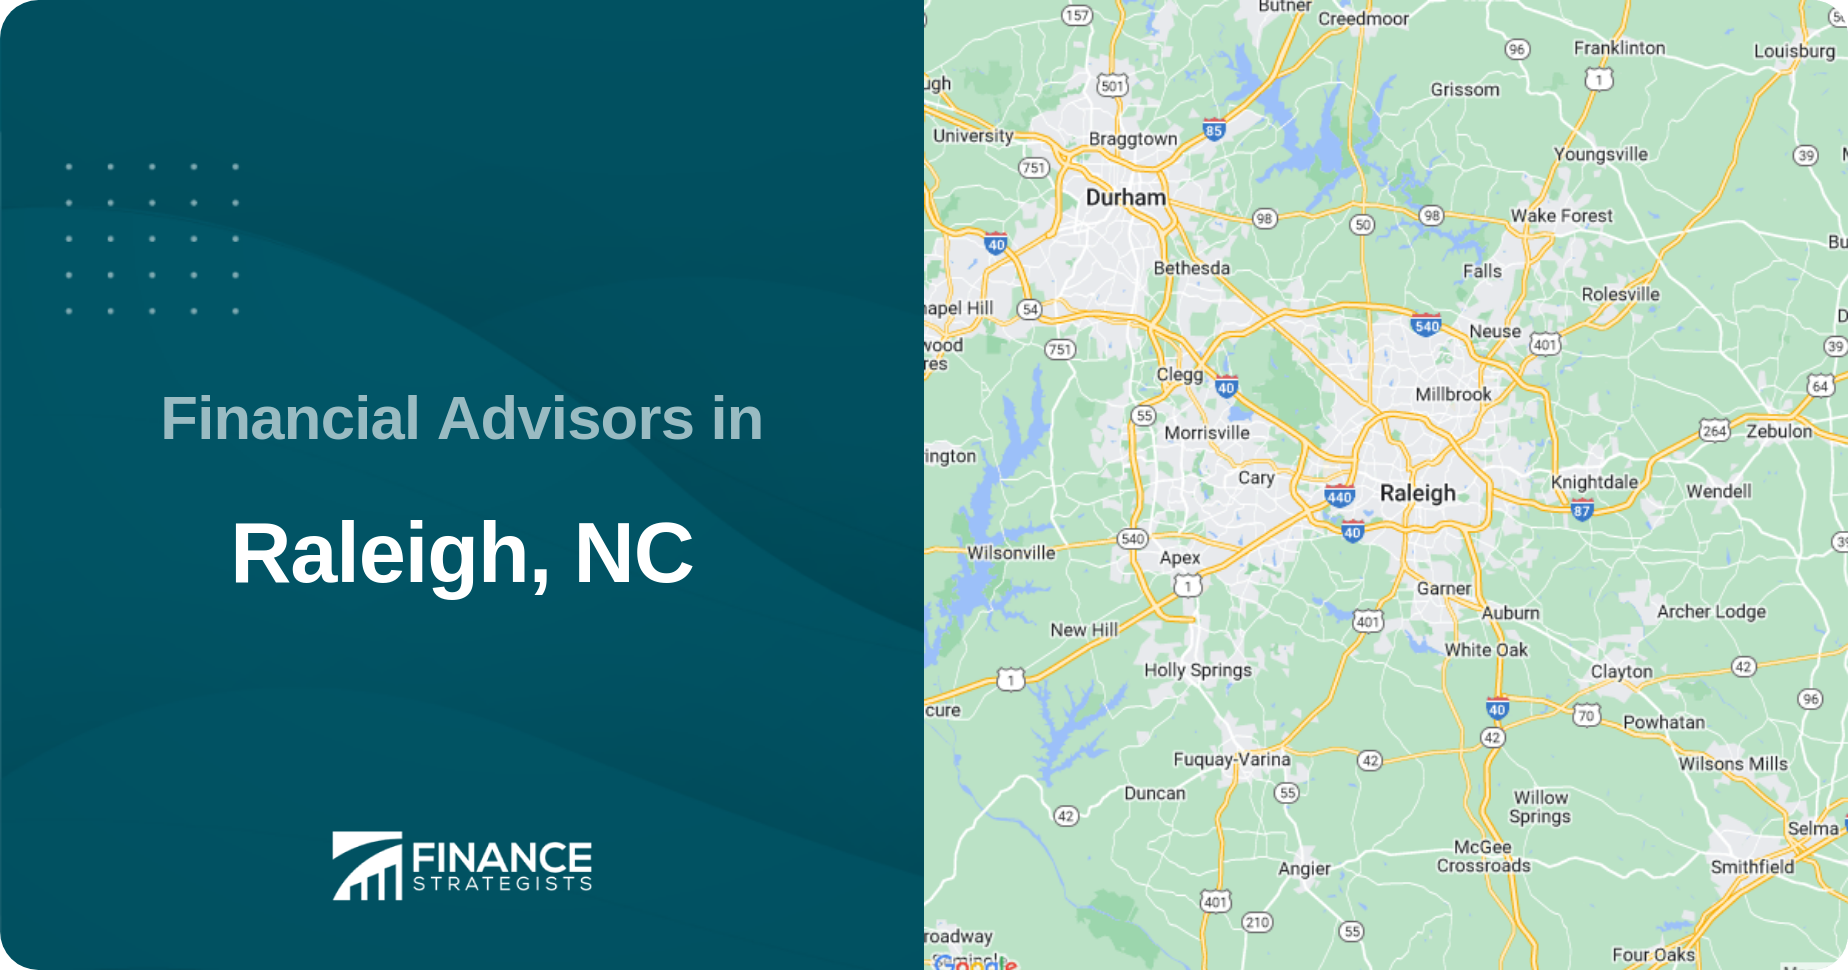 Financial Advisors in Raleigh, NC